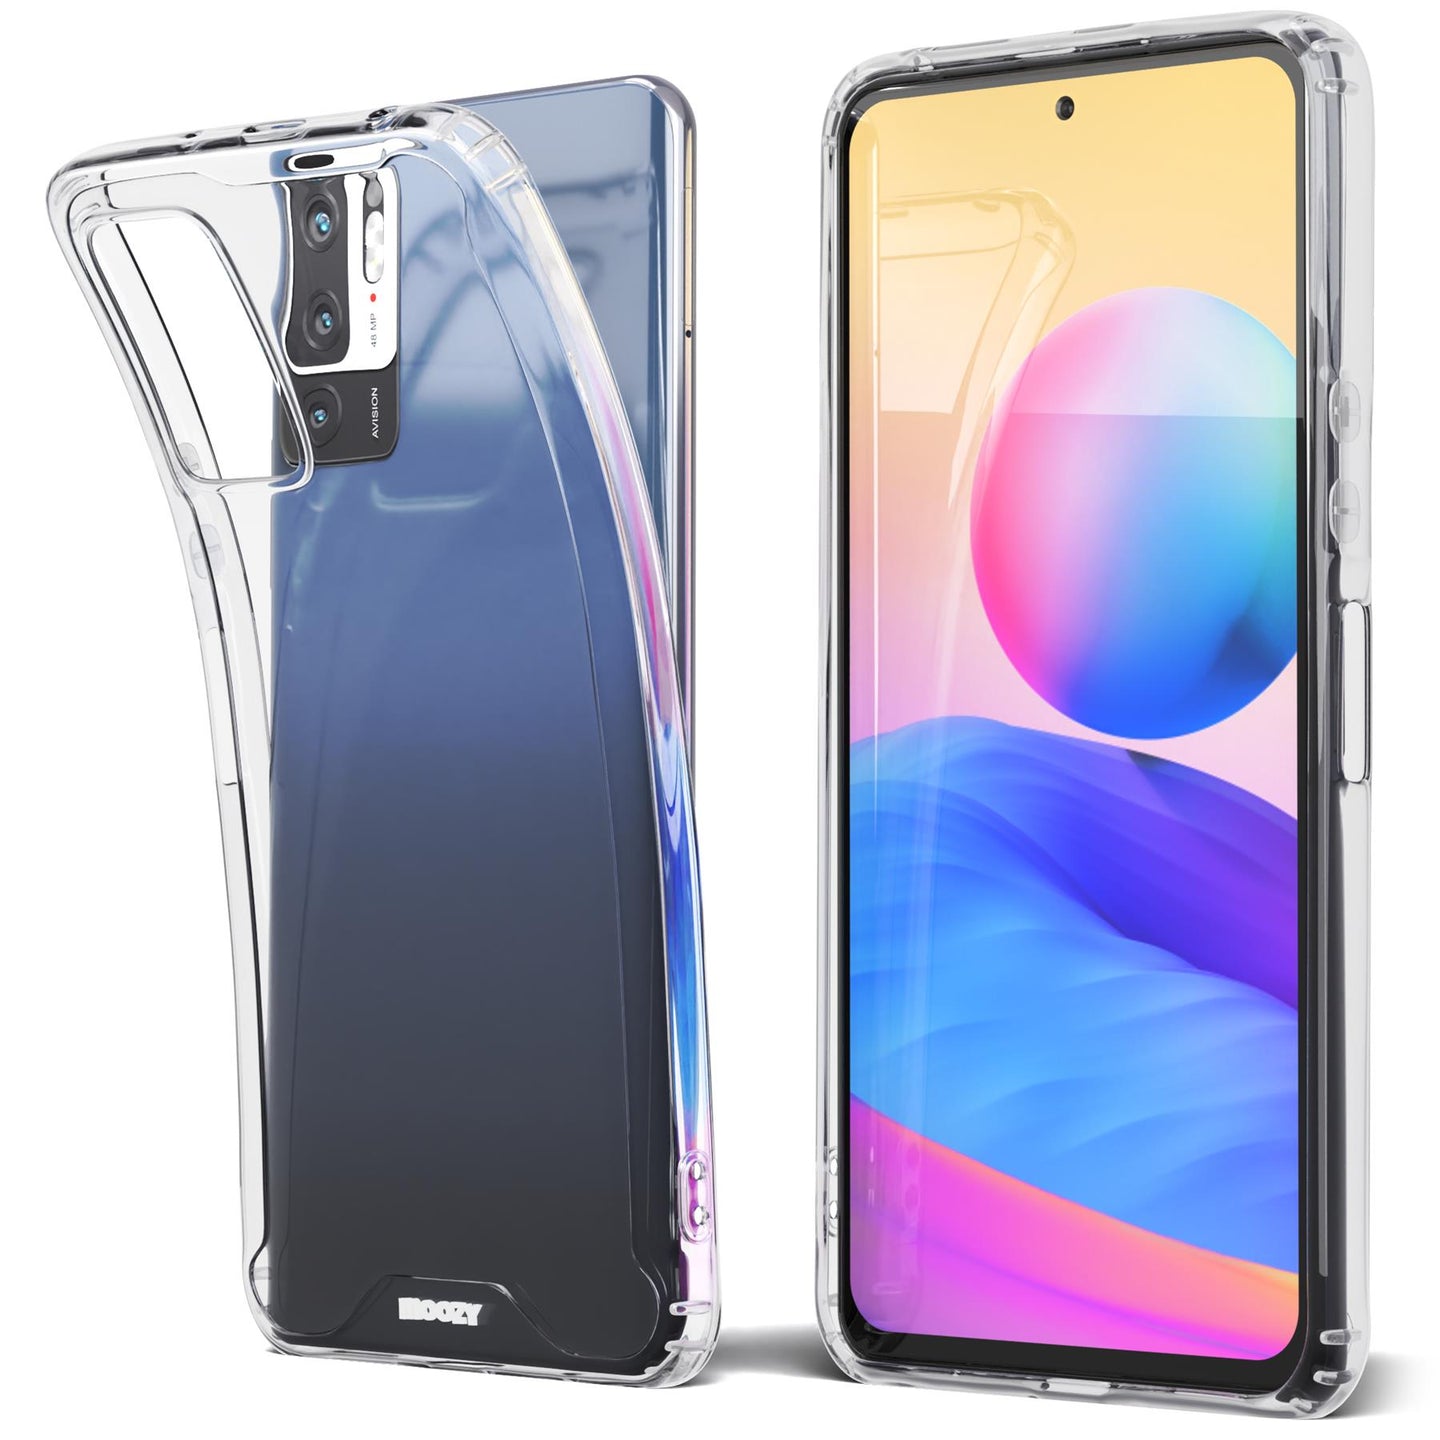 Moozy Xframe Shockproof Case for Xiaomi Redmi Note 10 5G and Poco M3 Pro 5G - Transparent Rim Case, Double Colour Clear Hybrid Cover with Shock Absorbing TPU Rim